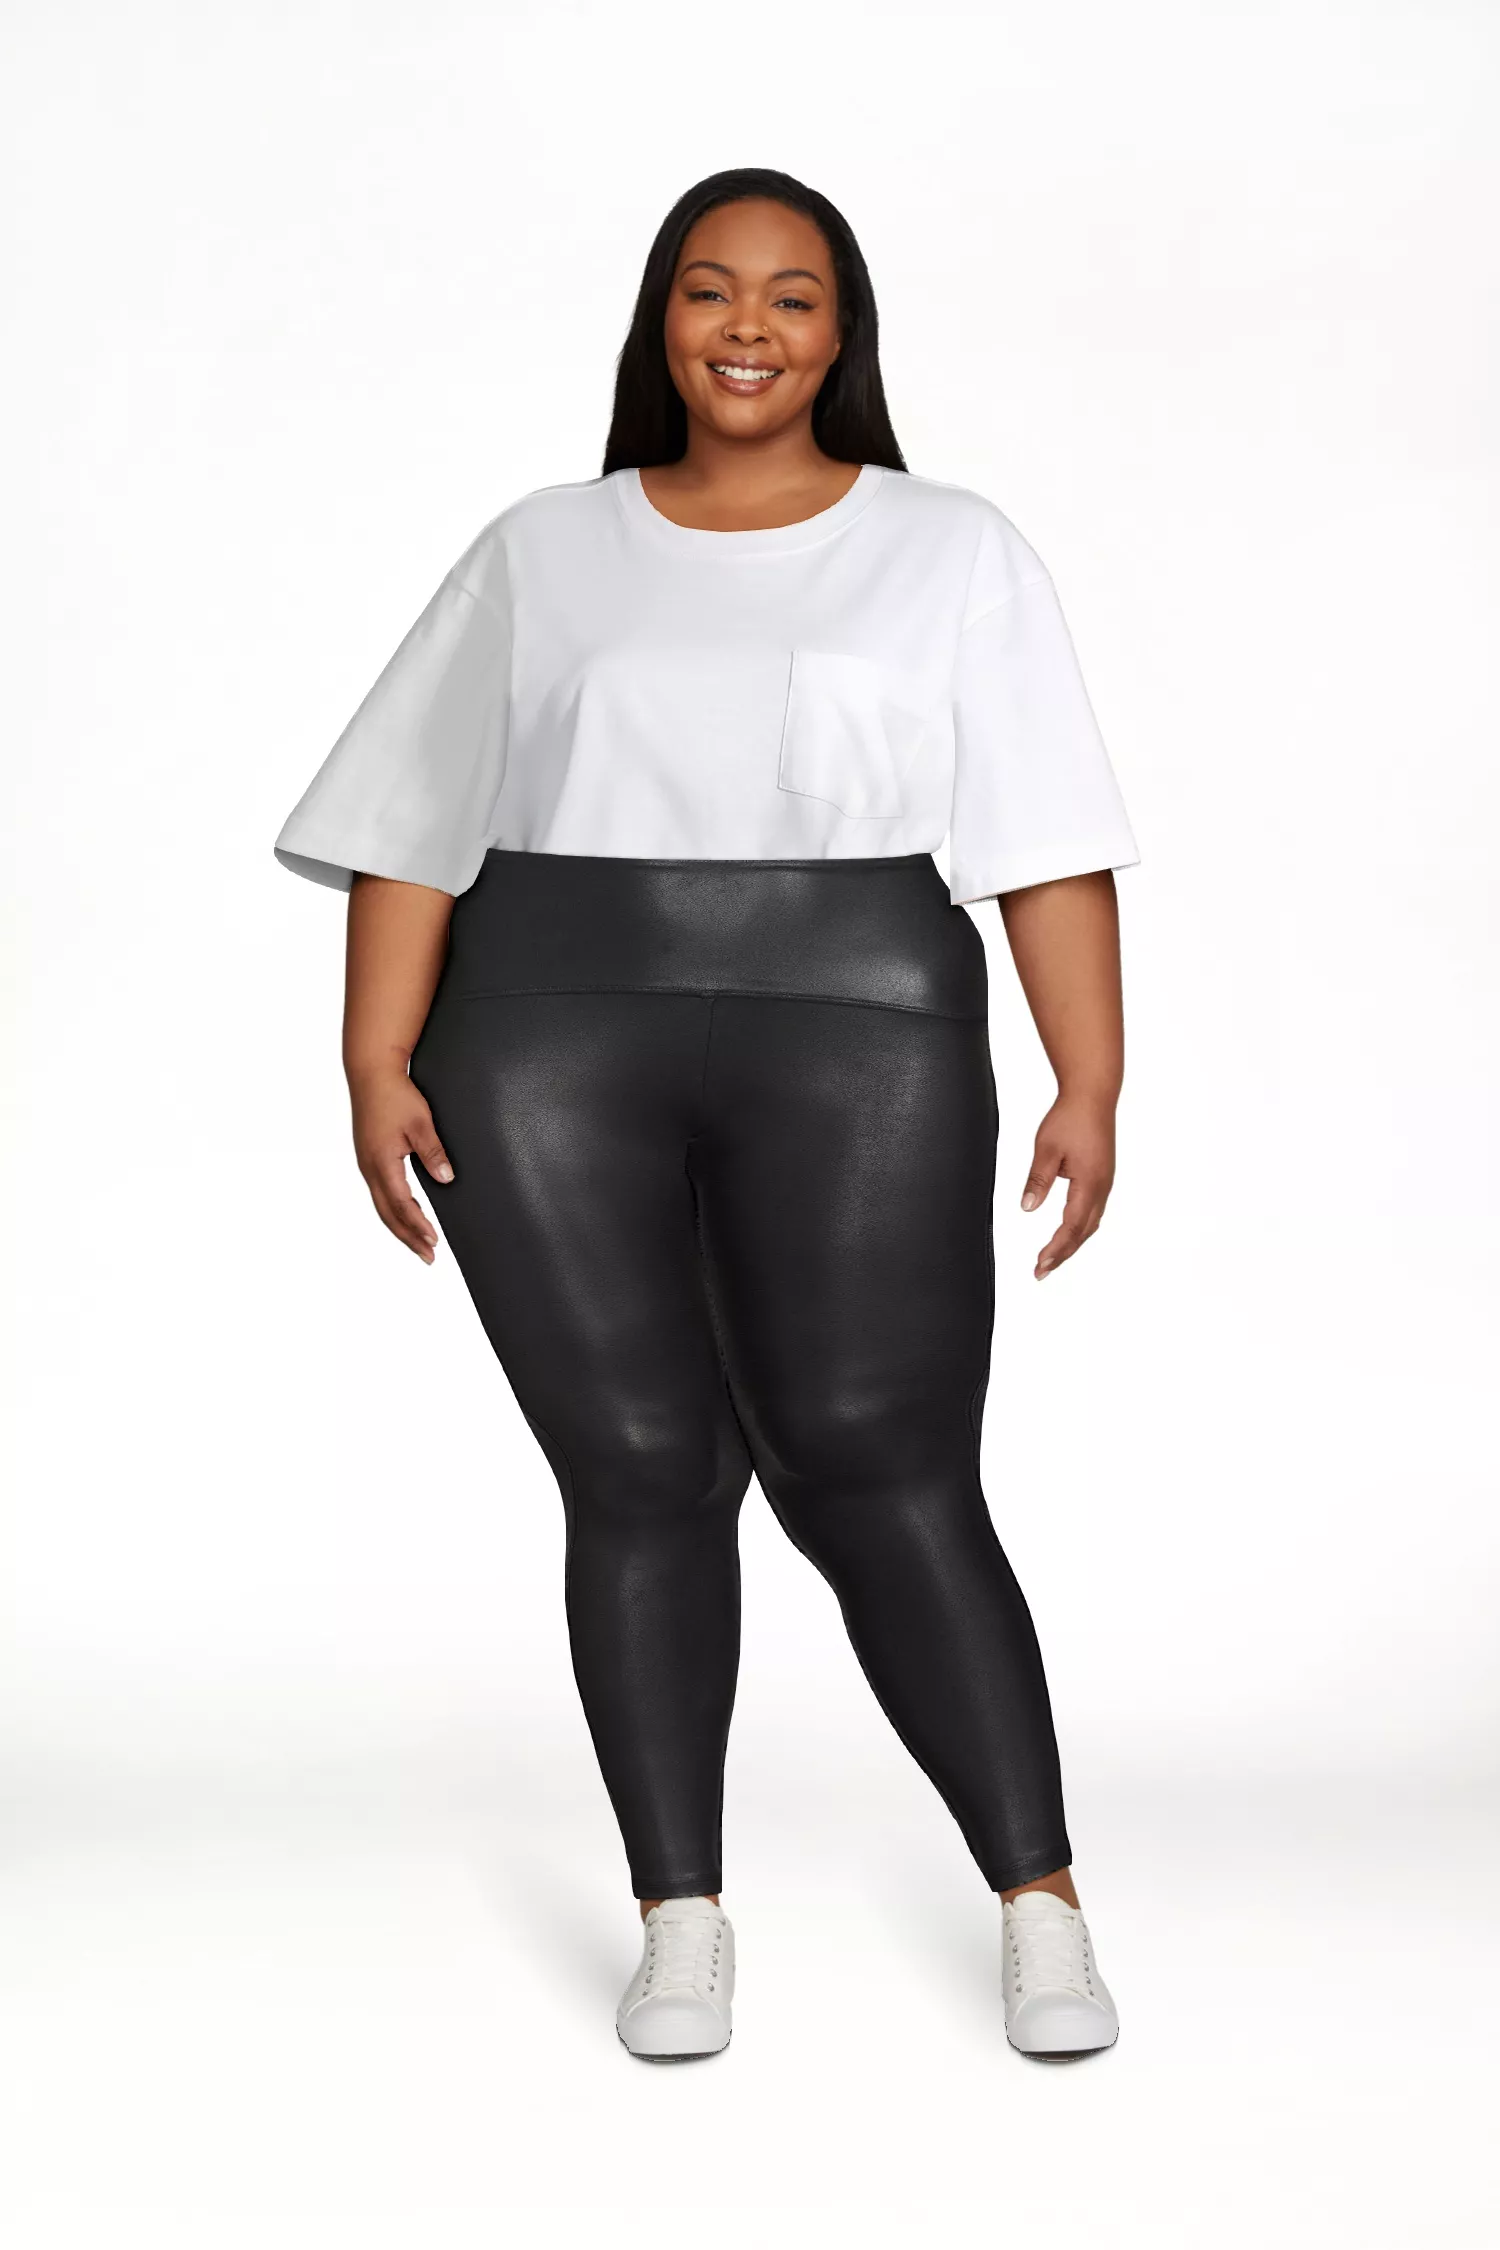 Plus Size Faux Leather Leggings Outfit for Winter - Alexa Webb